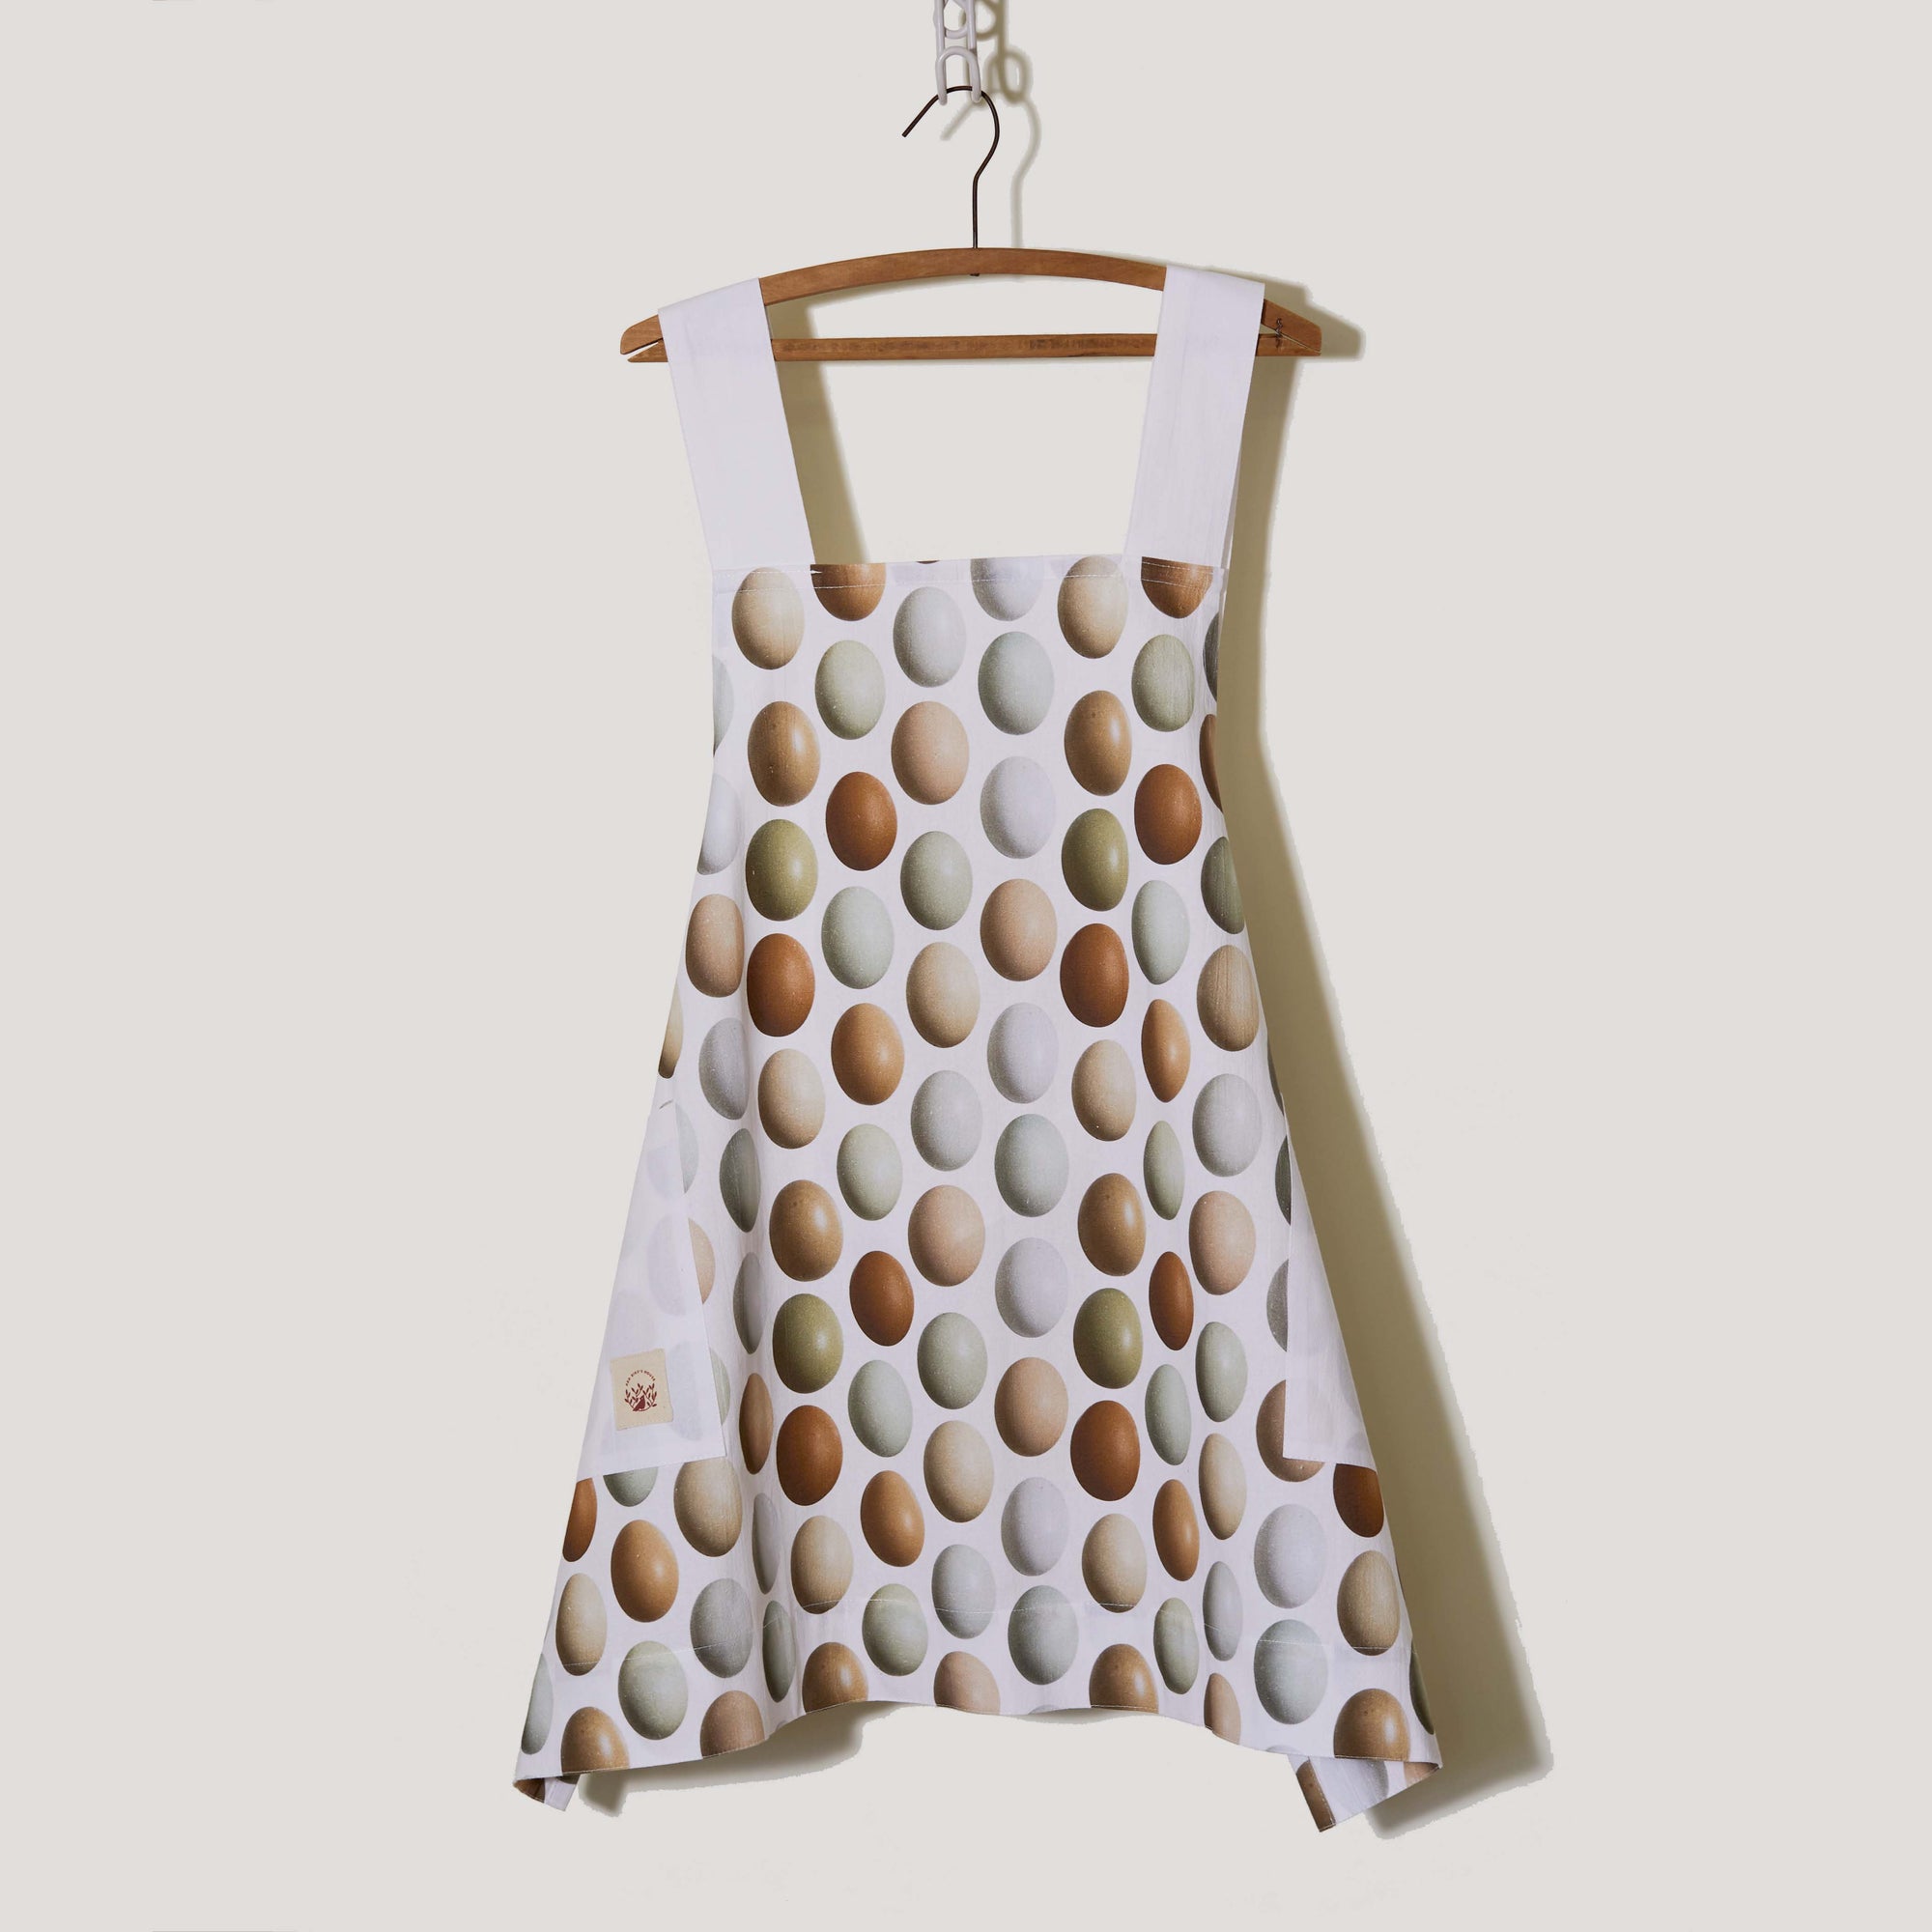  With its eye-catching criss-crossed design in the back and practicality, our cotton apron is a true kitchen essential. Whether you're a passionate baker, an aspiring chef, or a home lover seeking the perfect blend of style and functionality, this apron is sure to impress. Elevate your cooking experience today!  Features  Size: 35"x 27"  Straps-30"  Pockets: 8"  One size fits most Original photography by Pauline Stevens Photography Maxchine wash/Tumble dry No bleach